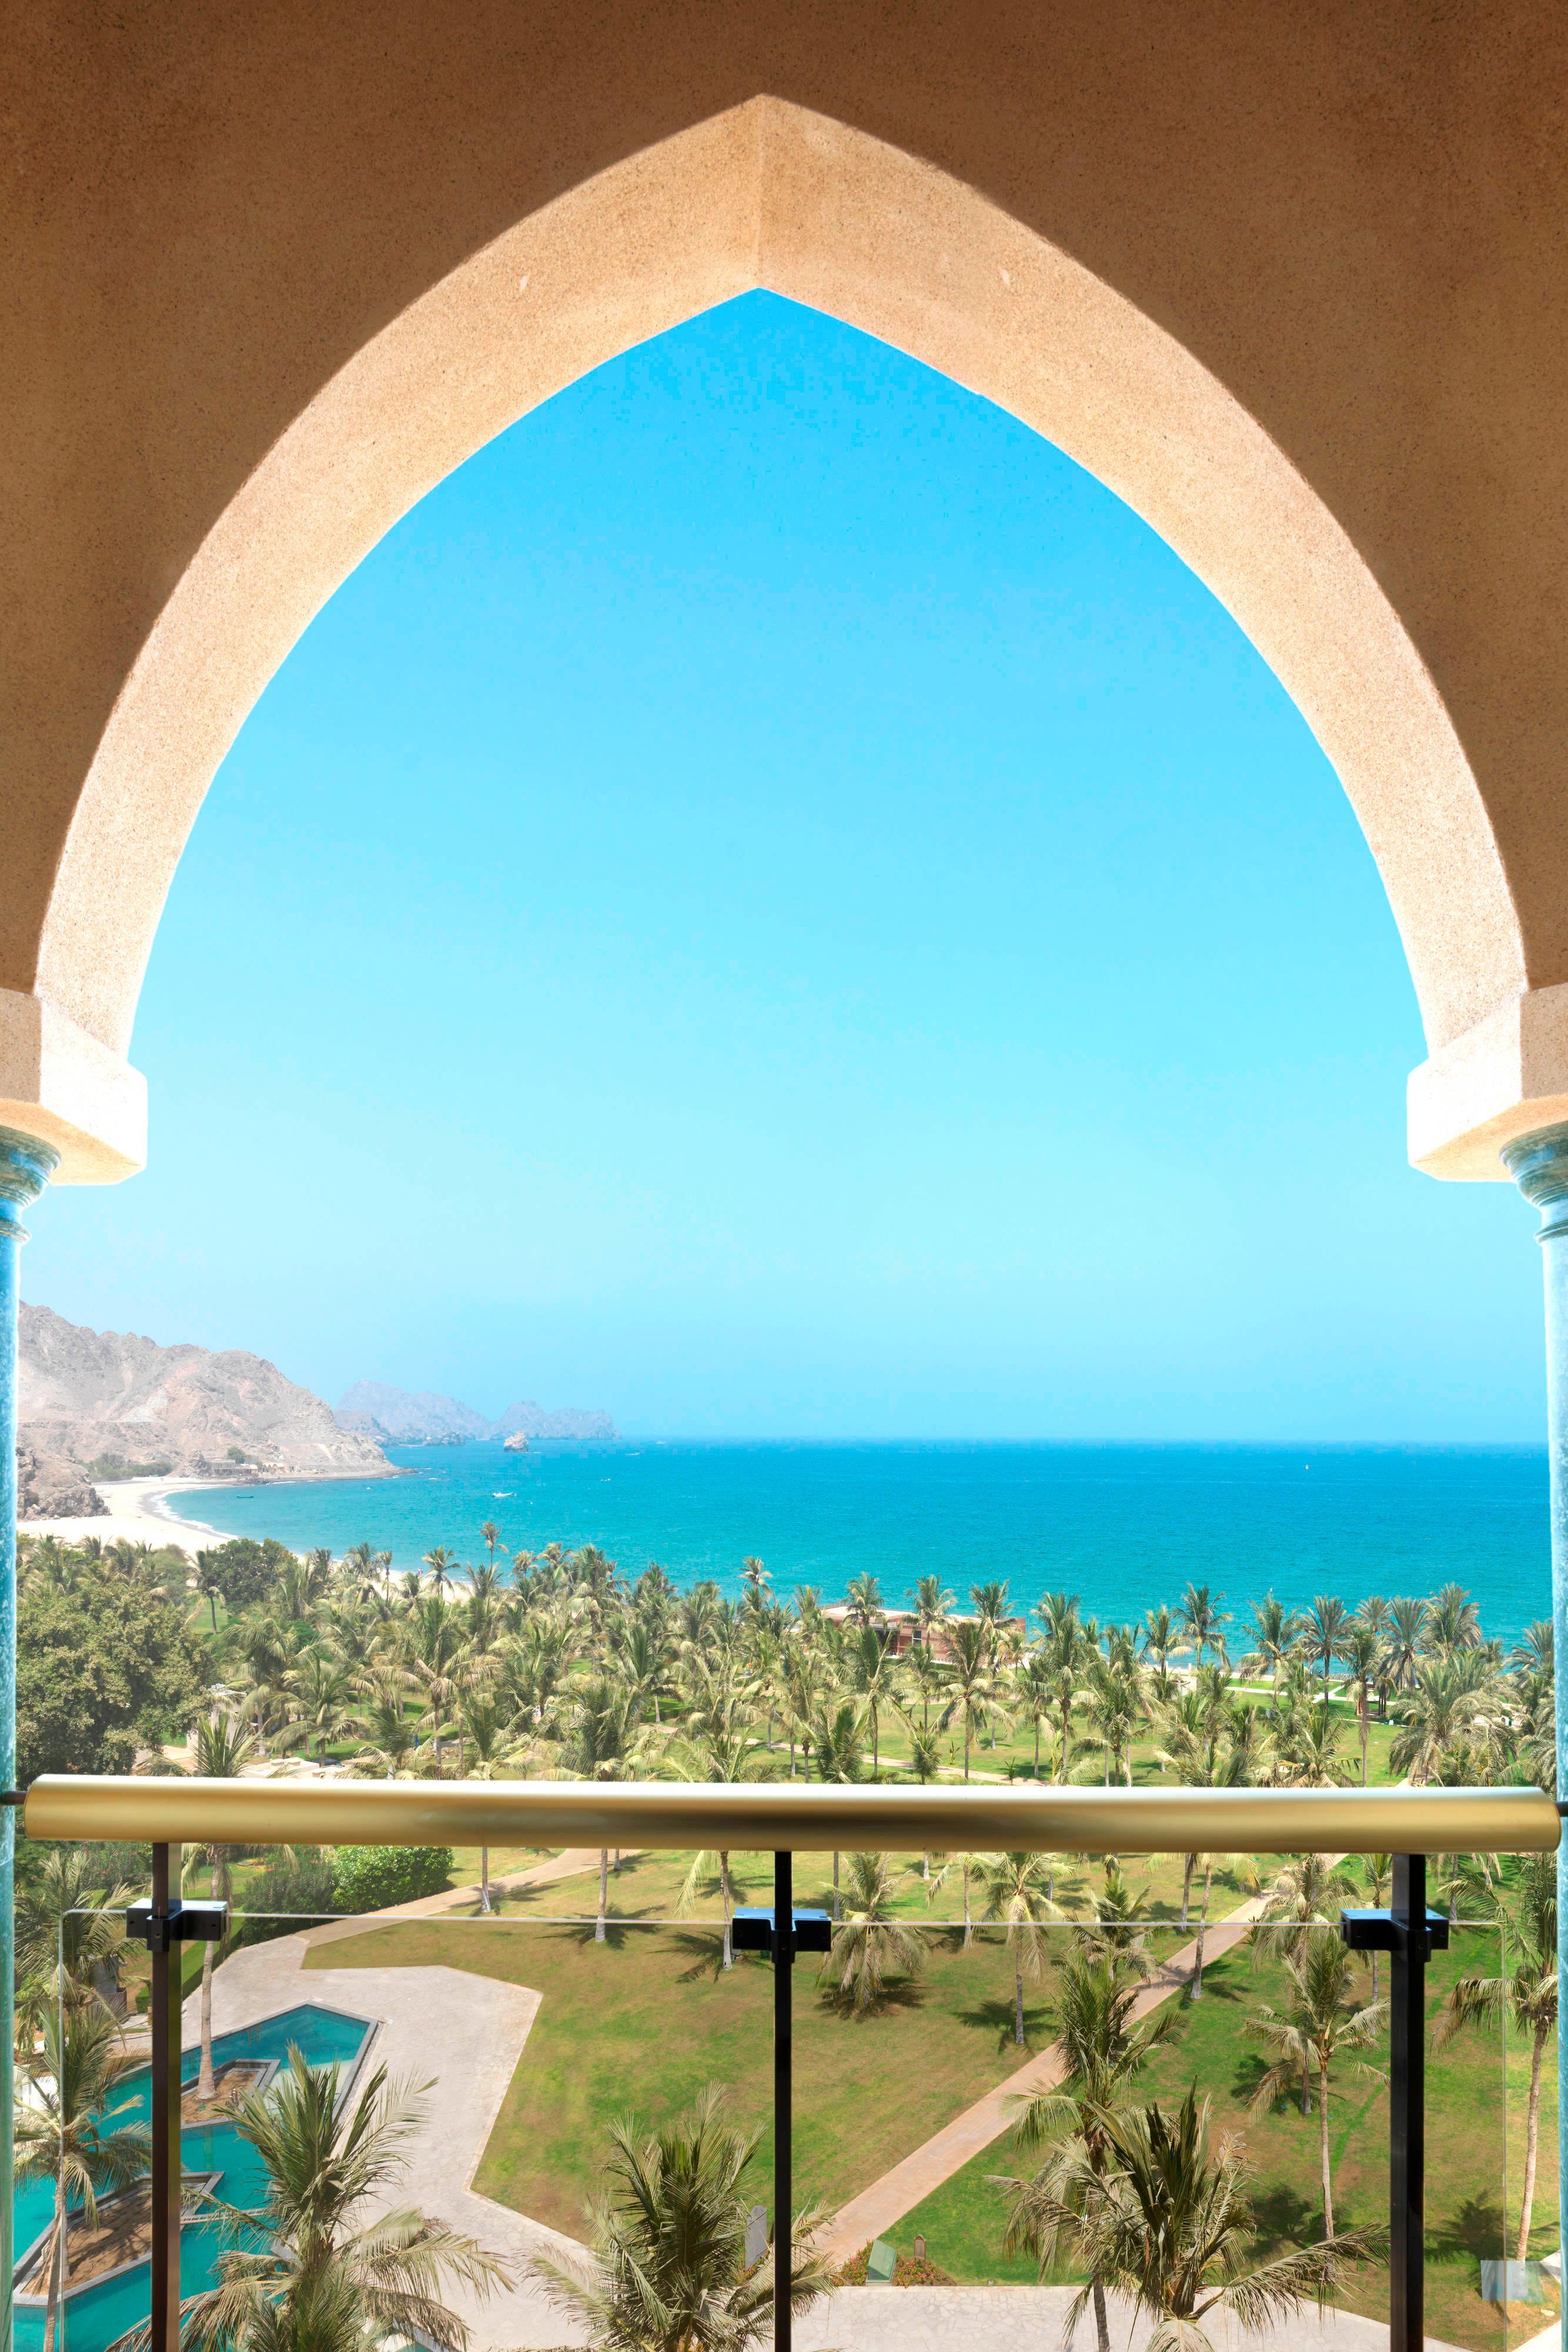 Private balconies open up to spectacular views on the beachfront.